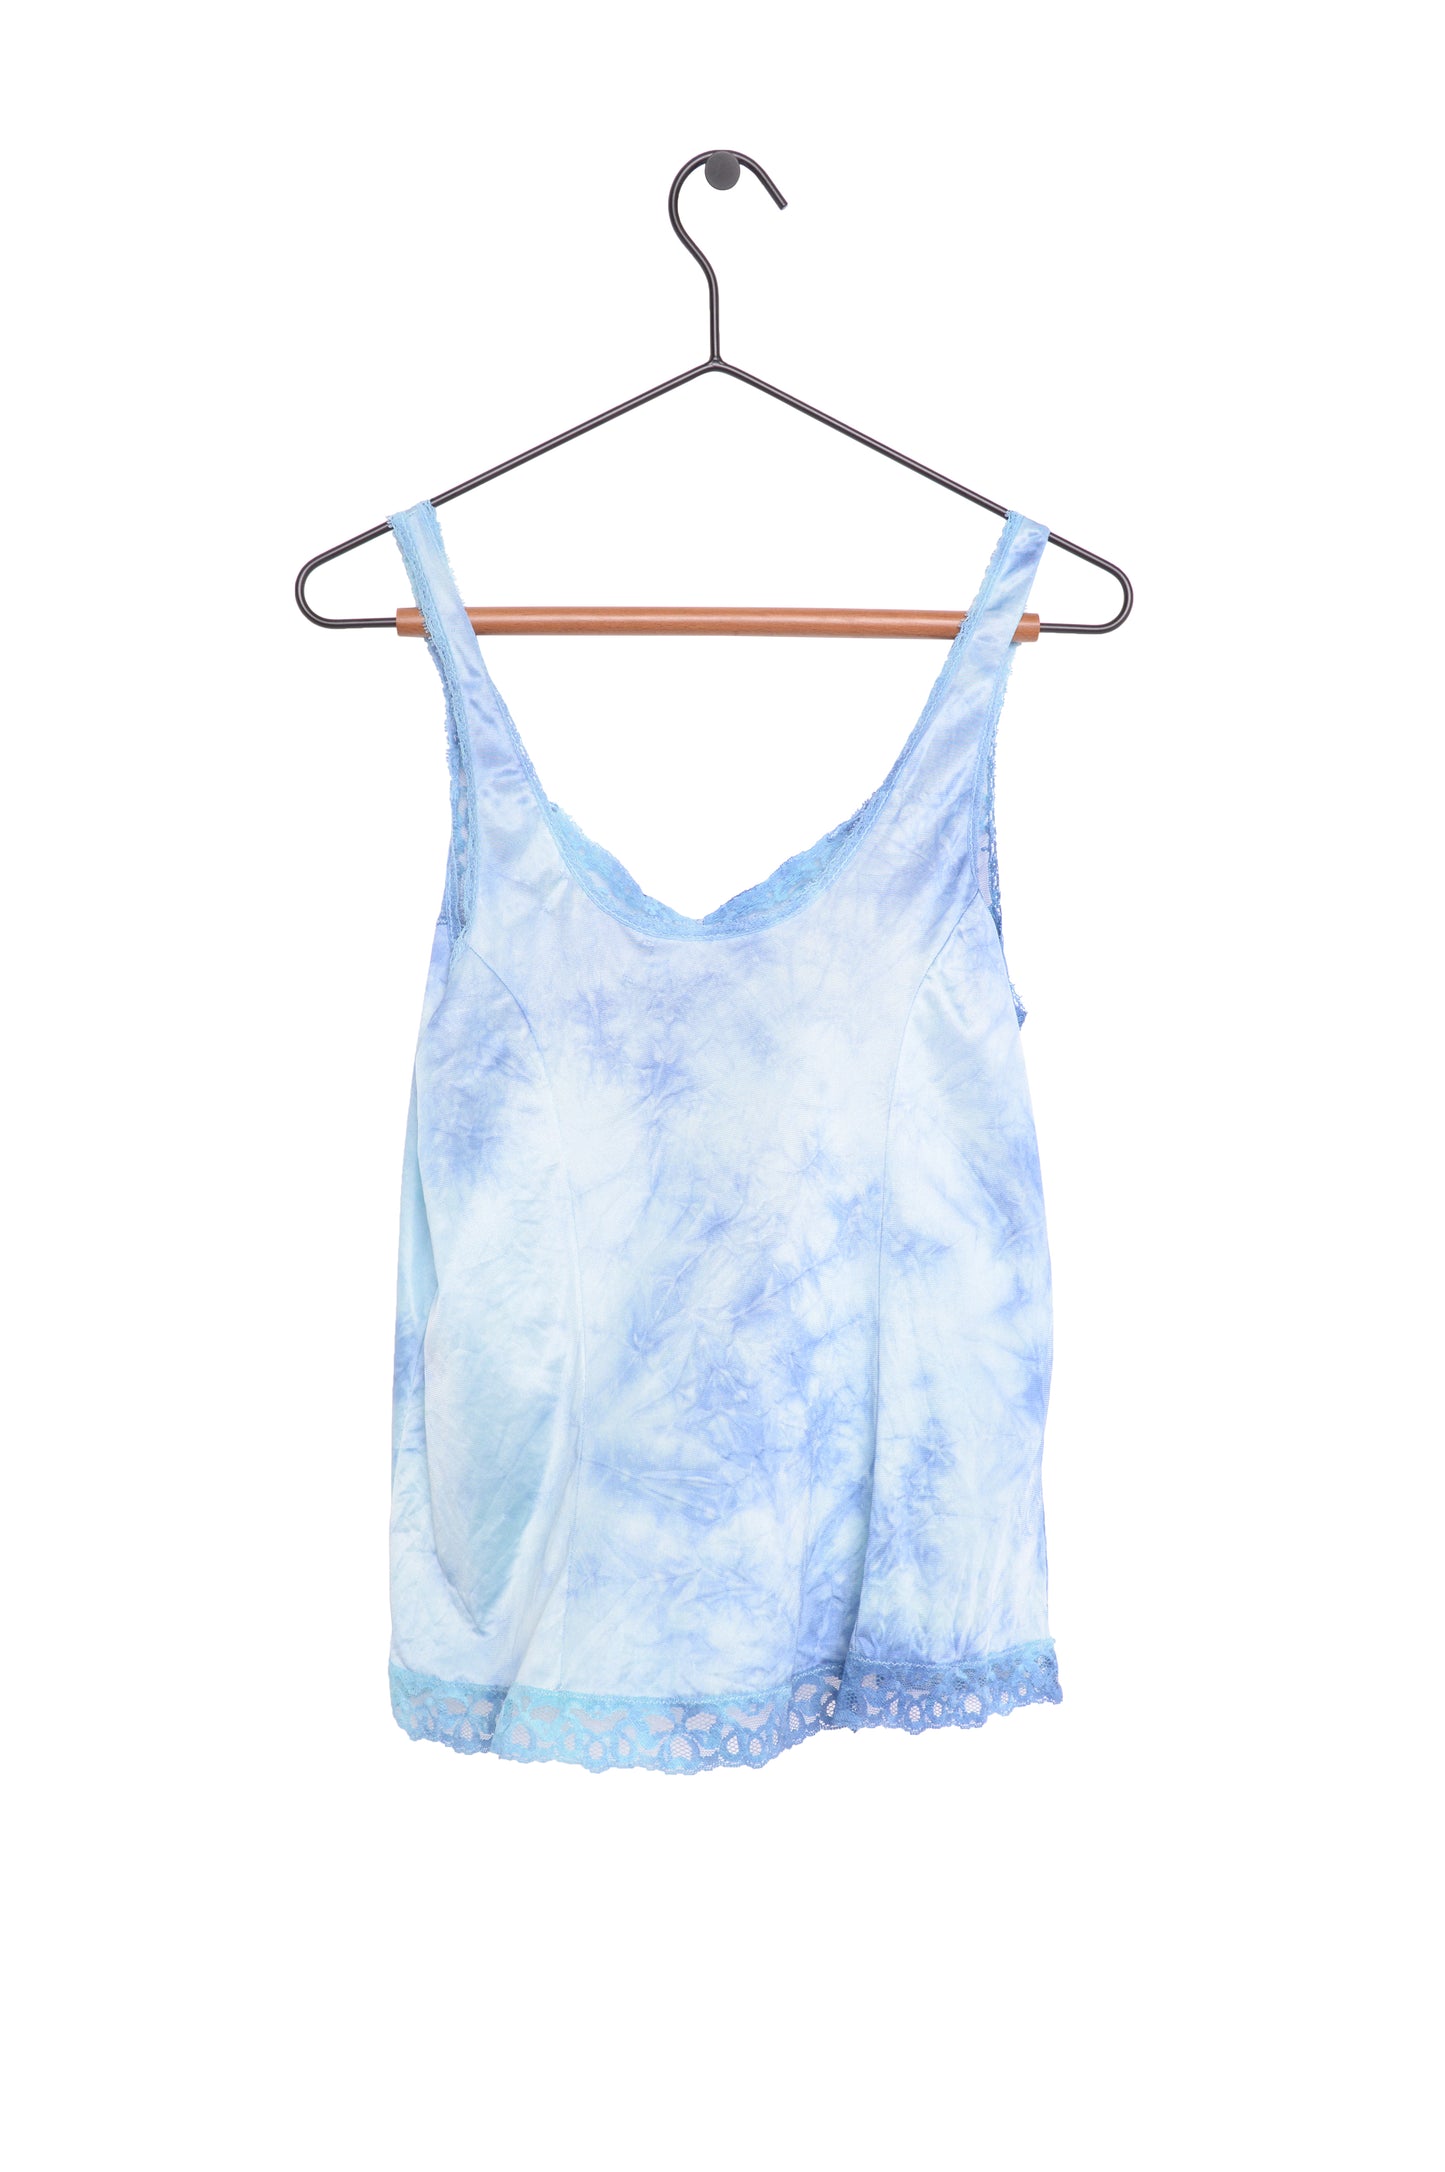 Hand-Dyed Lace Trim Slip Top